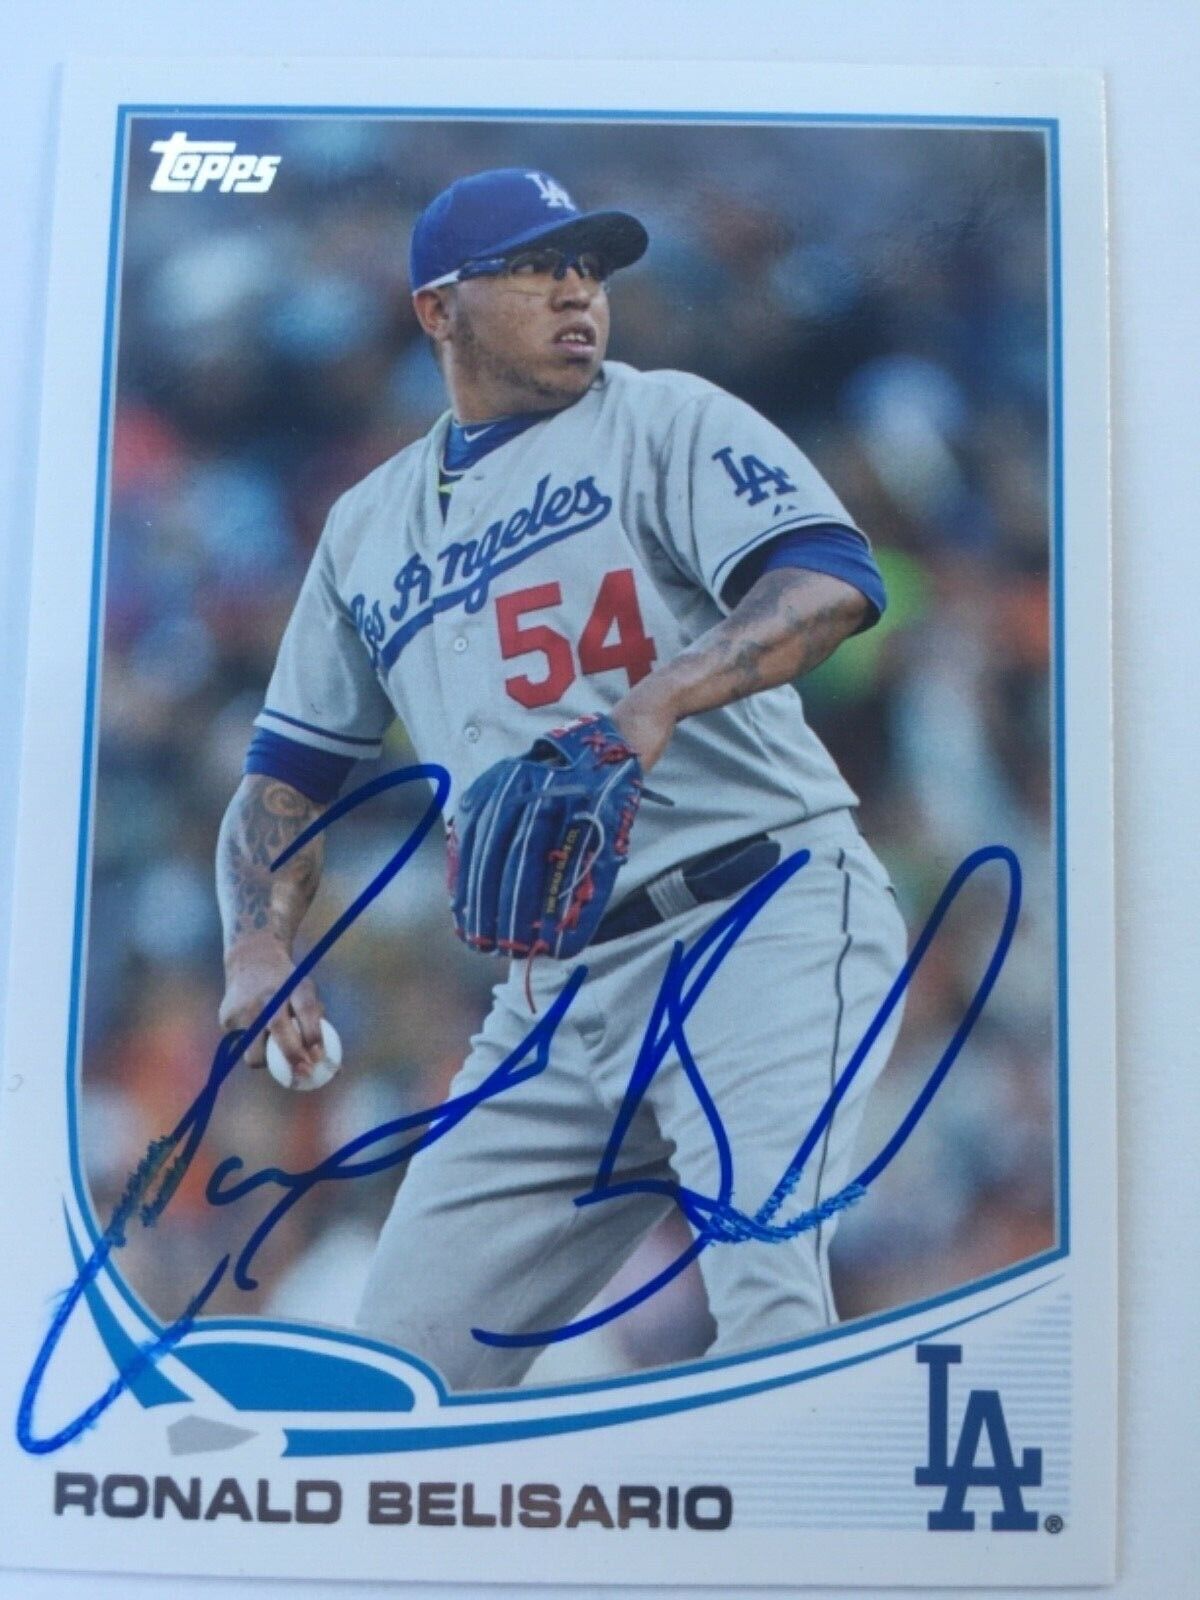 2013 Topps Los Angeles Dodgers Ronald Belisario Autographed Card #US132